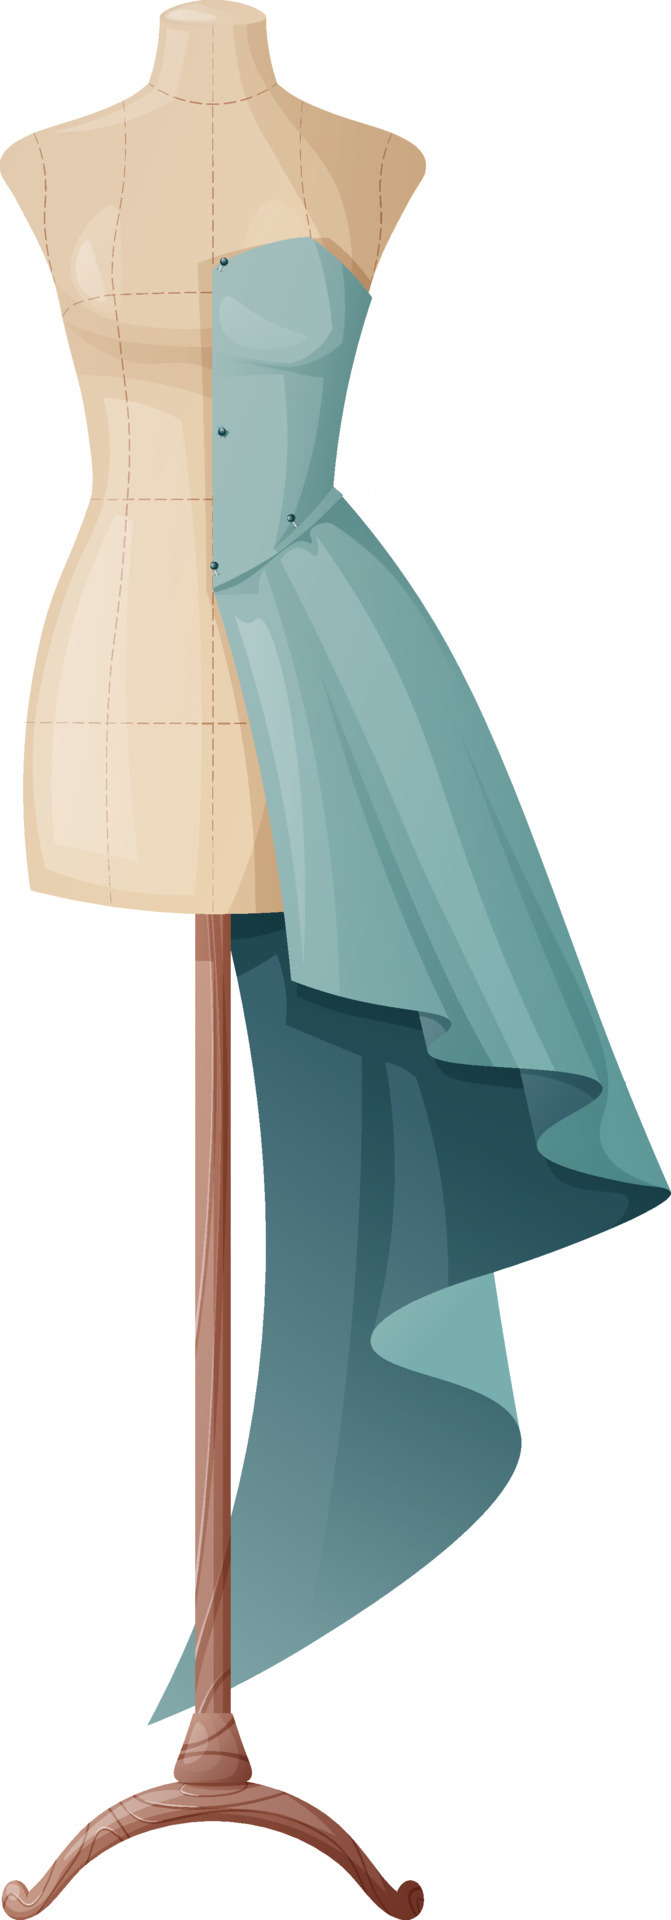 Sewing mannequin on an isolated background. Vector illustration of